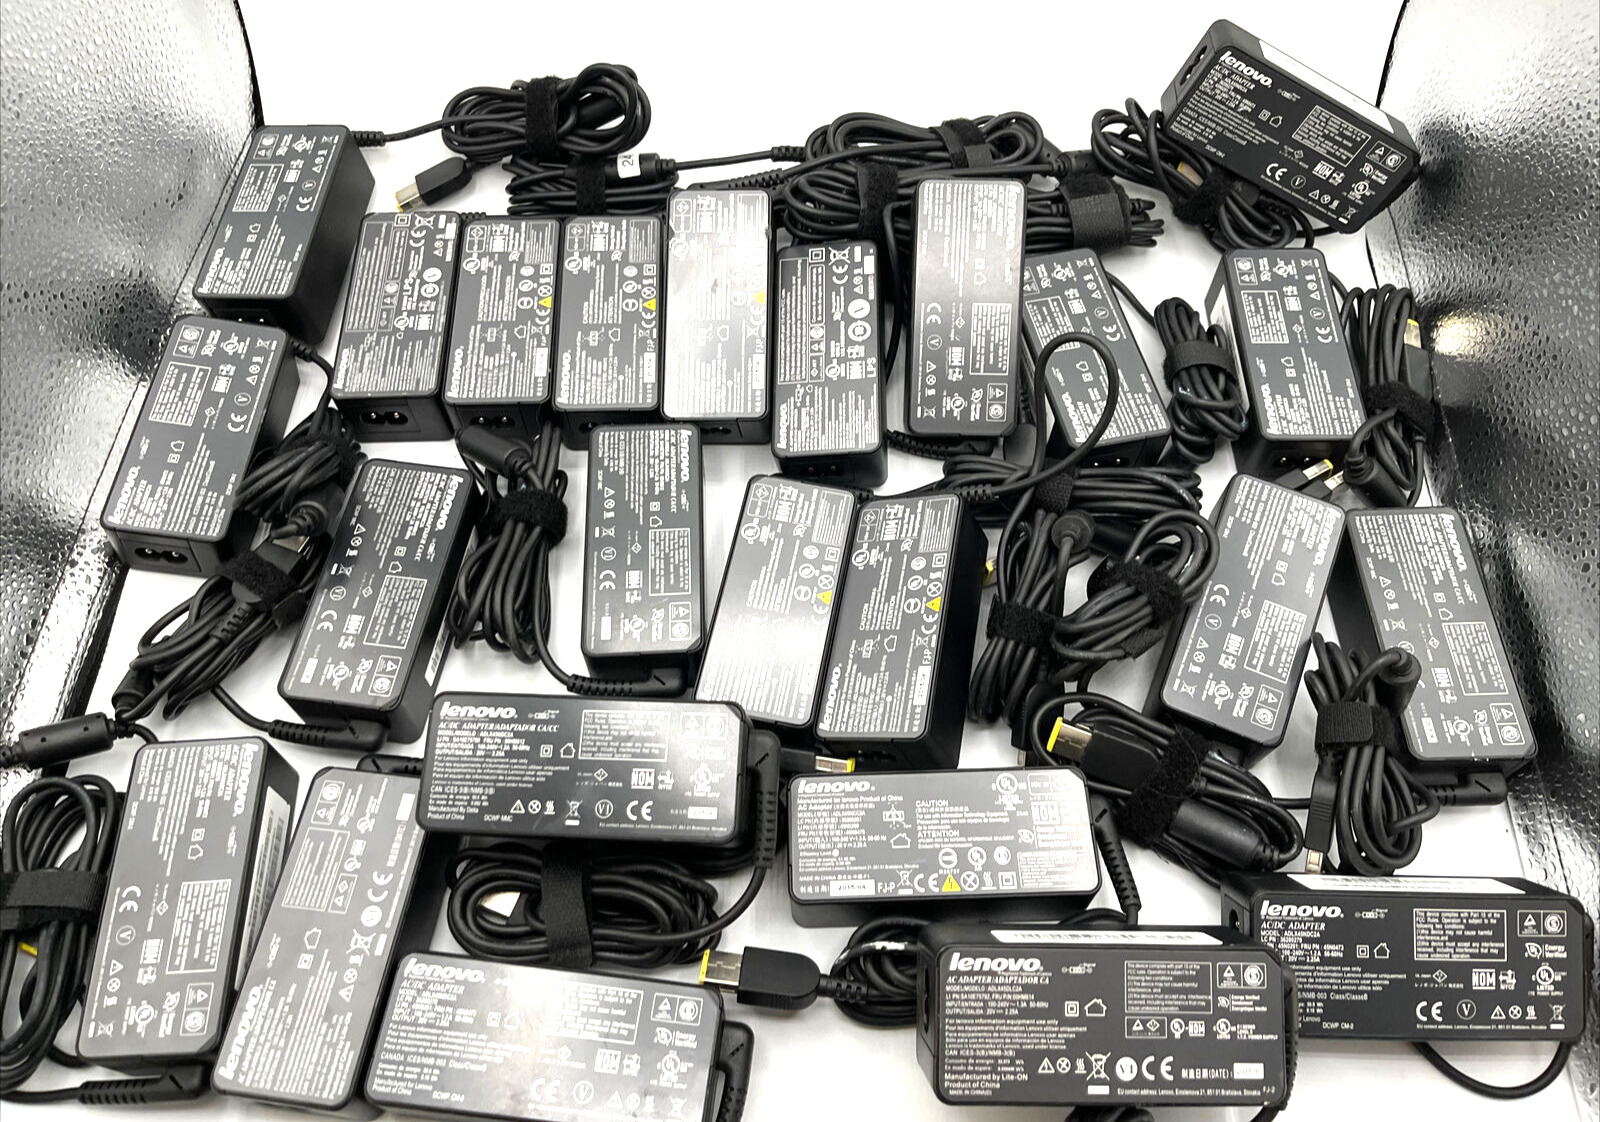 Lot of 25 Lenovo AC Power Adapters - NO POWER CORD ENDS - Mixed Lot ADLX45NLC2A